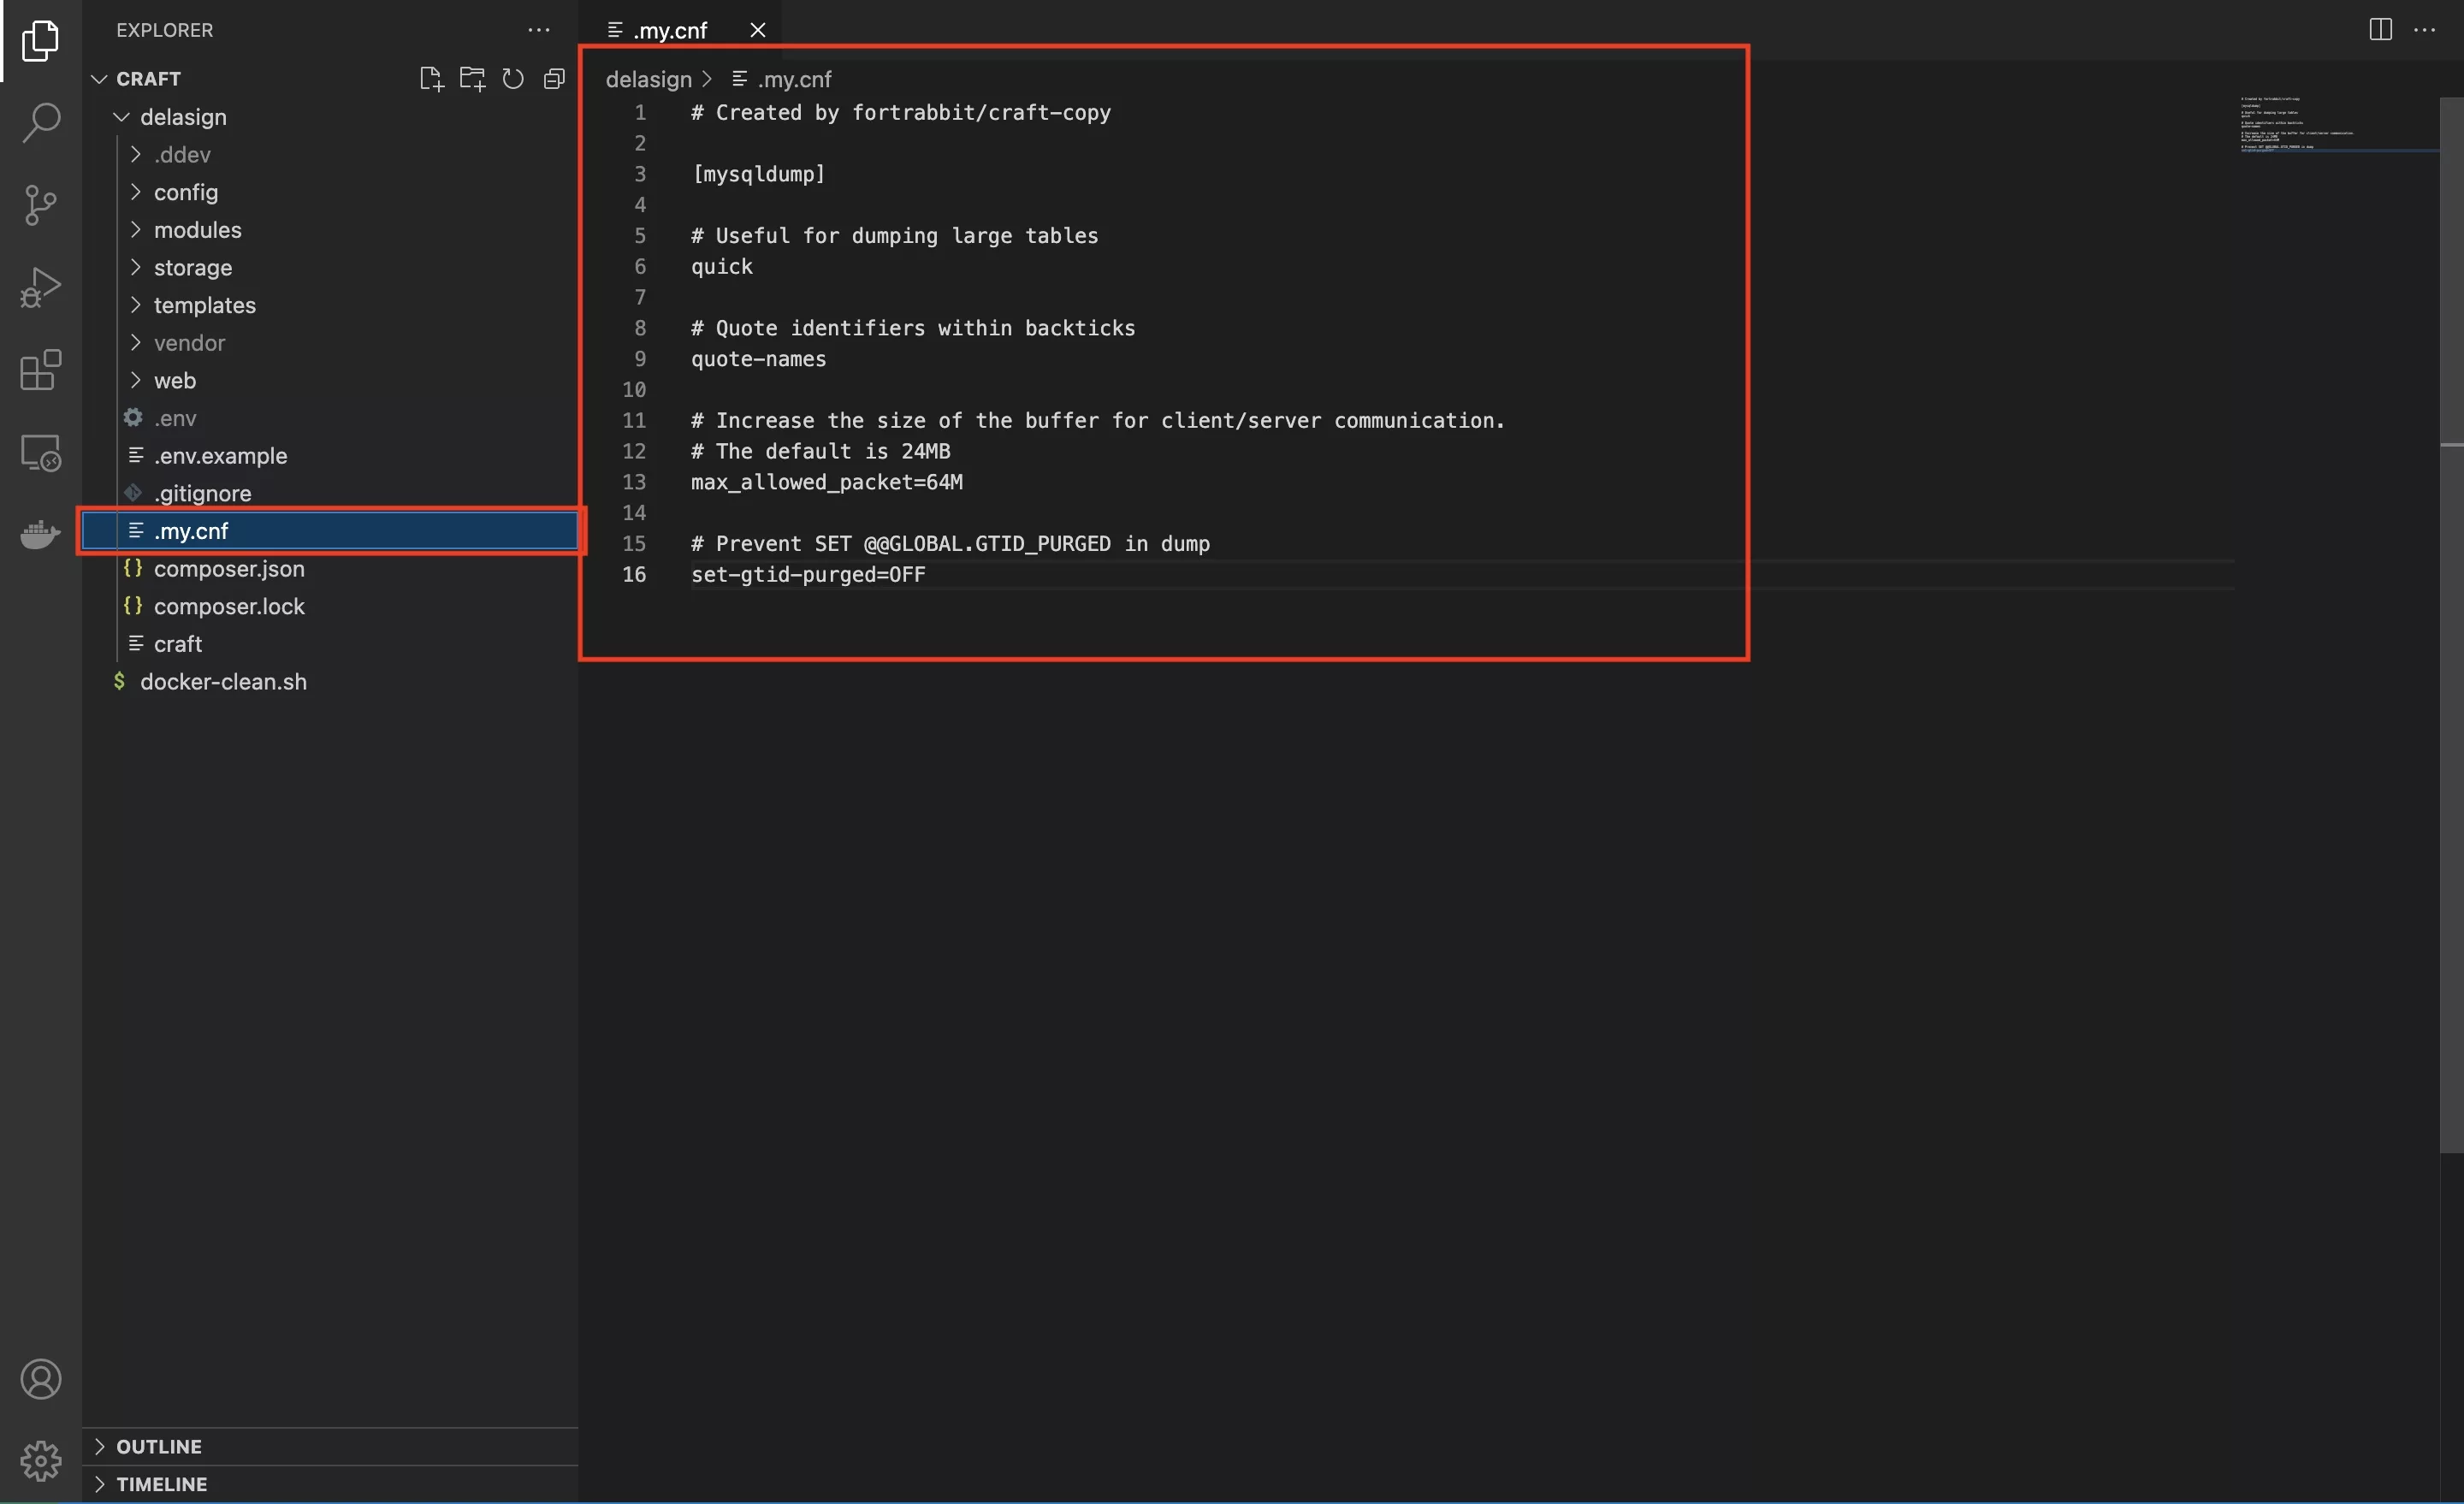 A screenshot of VSCode with the code for the .my.cnf provided by Fortrabbit.